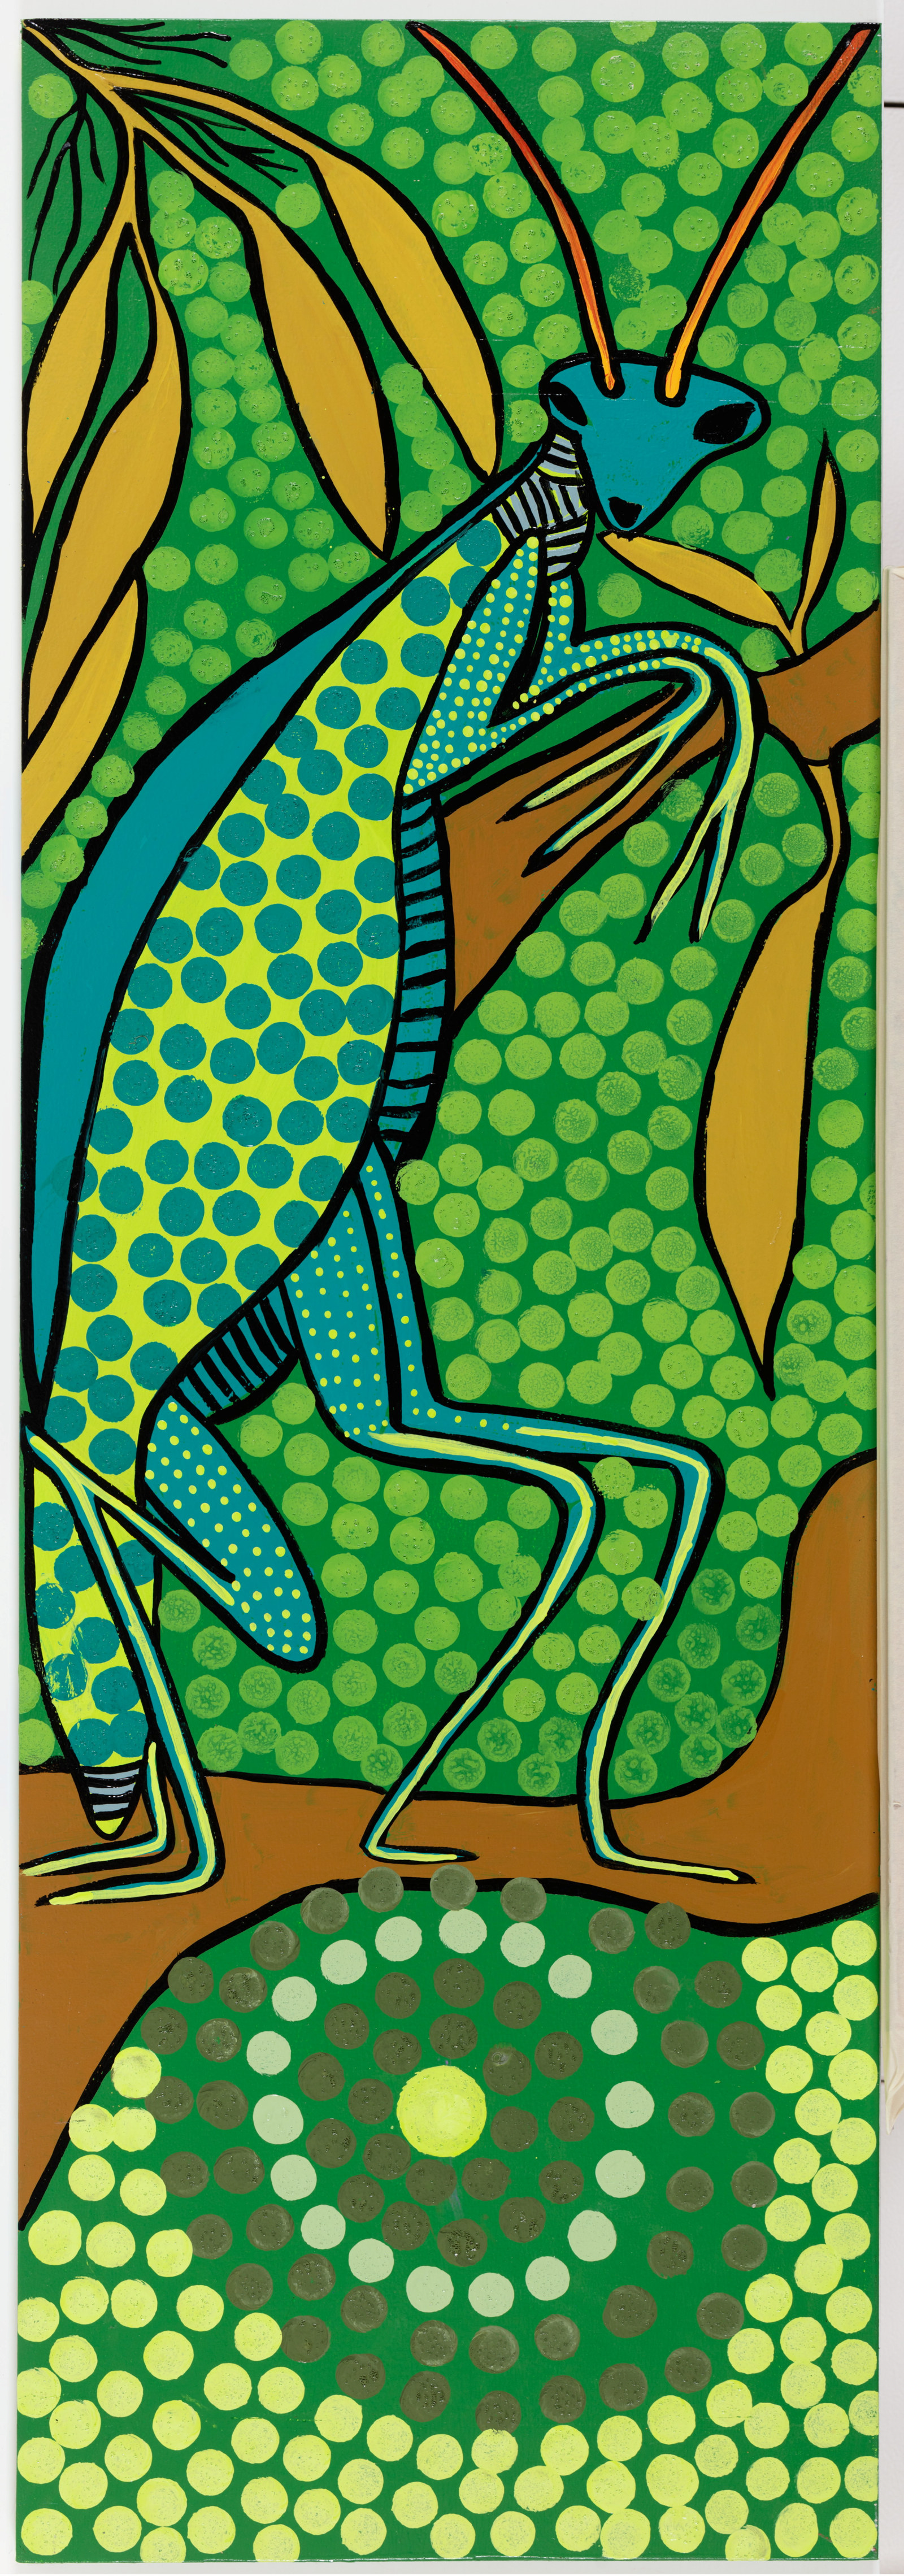 The praying mantis, Lorraine Brown and Narelle Thomas, 2022, acrylic on plywood board, 122.5cm x 41cm
One of the hidden stick figures of the lagoon. He can camouflage his body for protection.